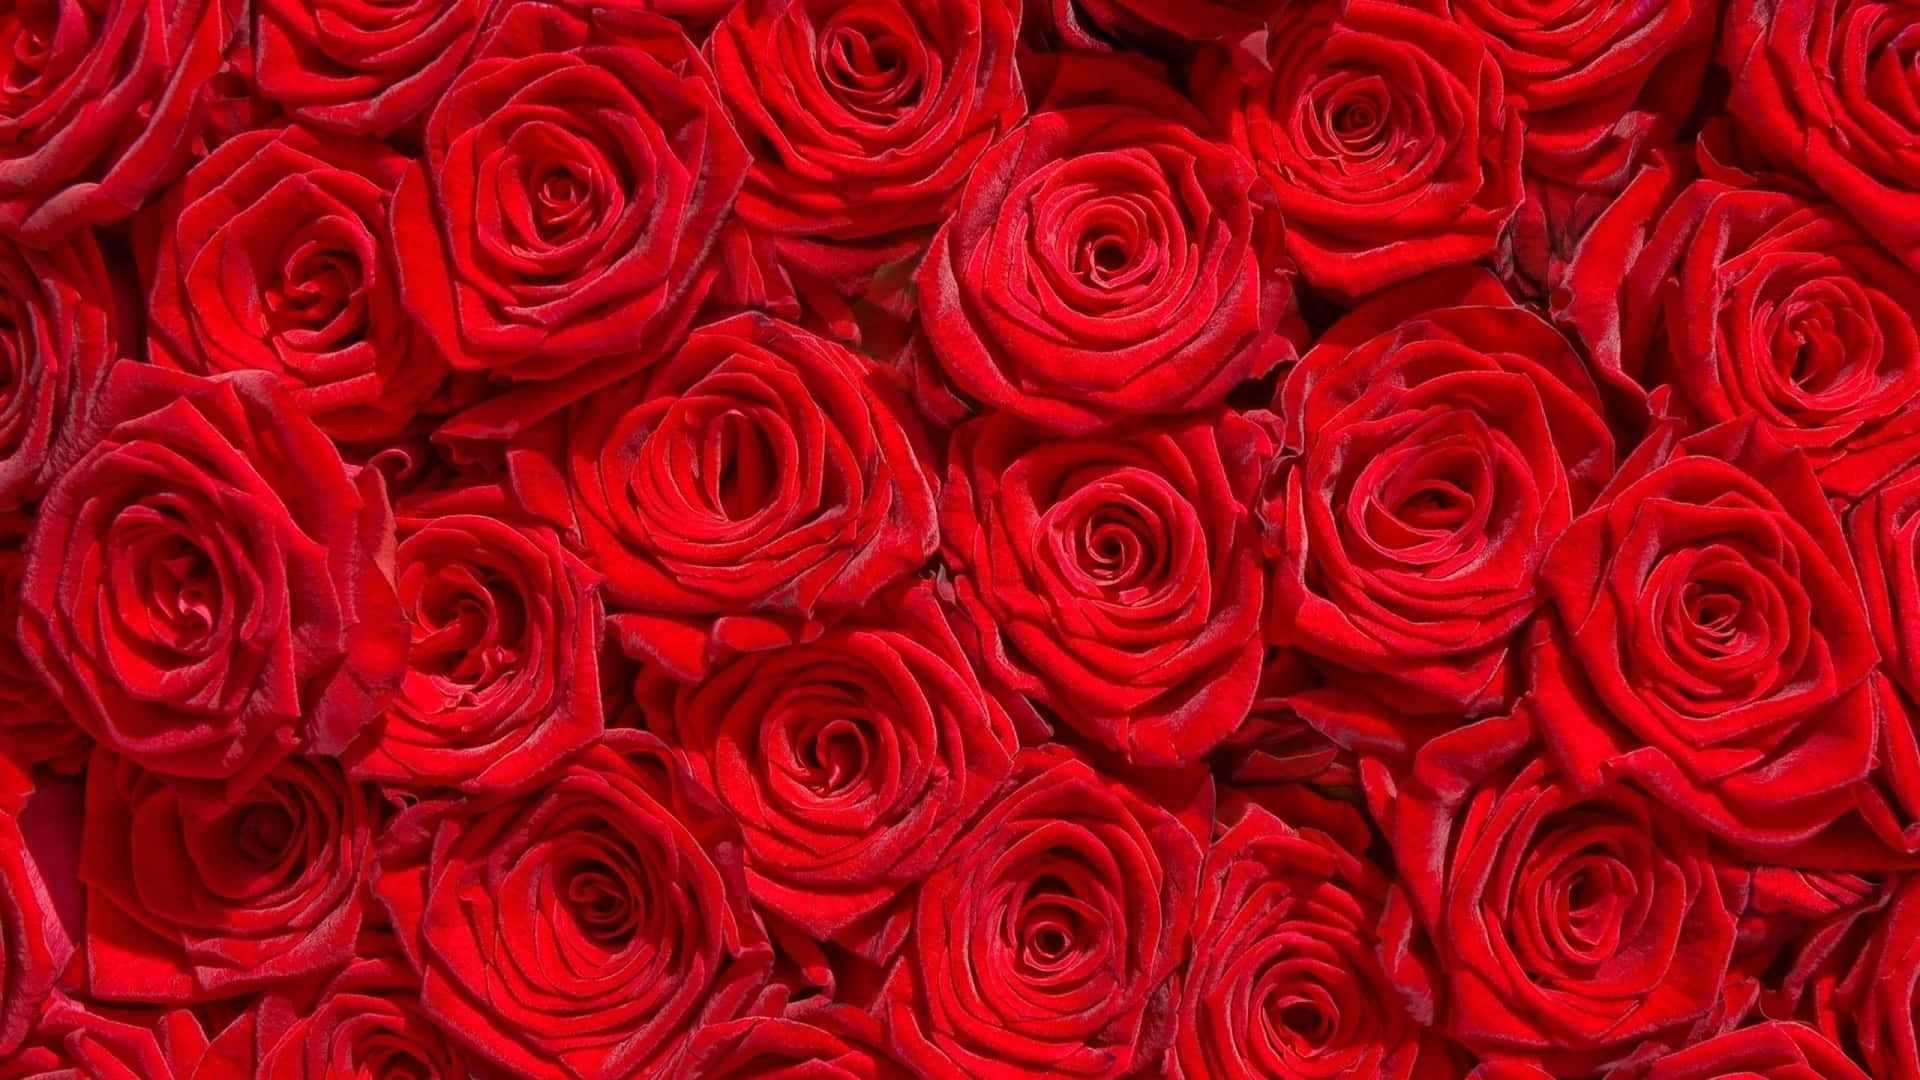 Closely Packed Group Of Red Roses Laptop Wallpaper